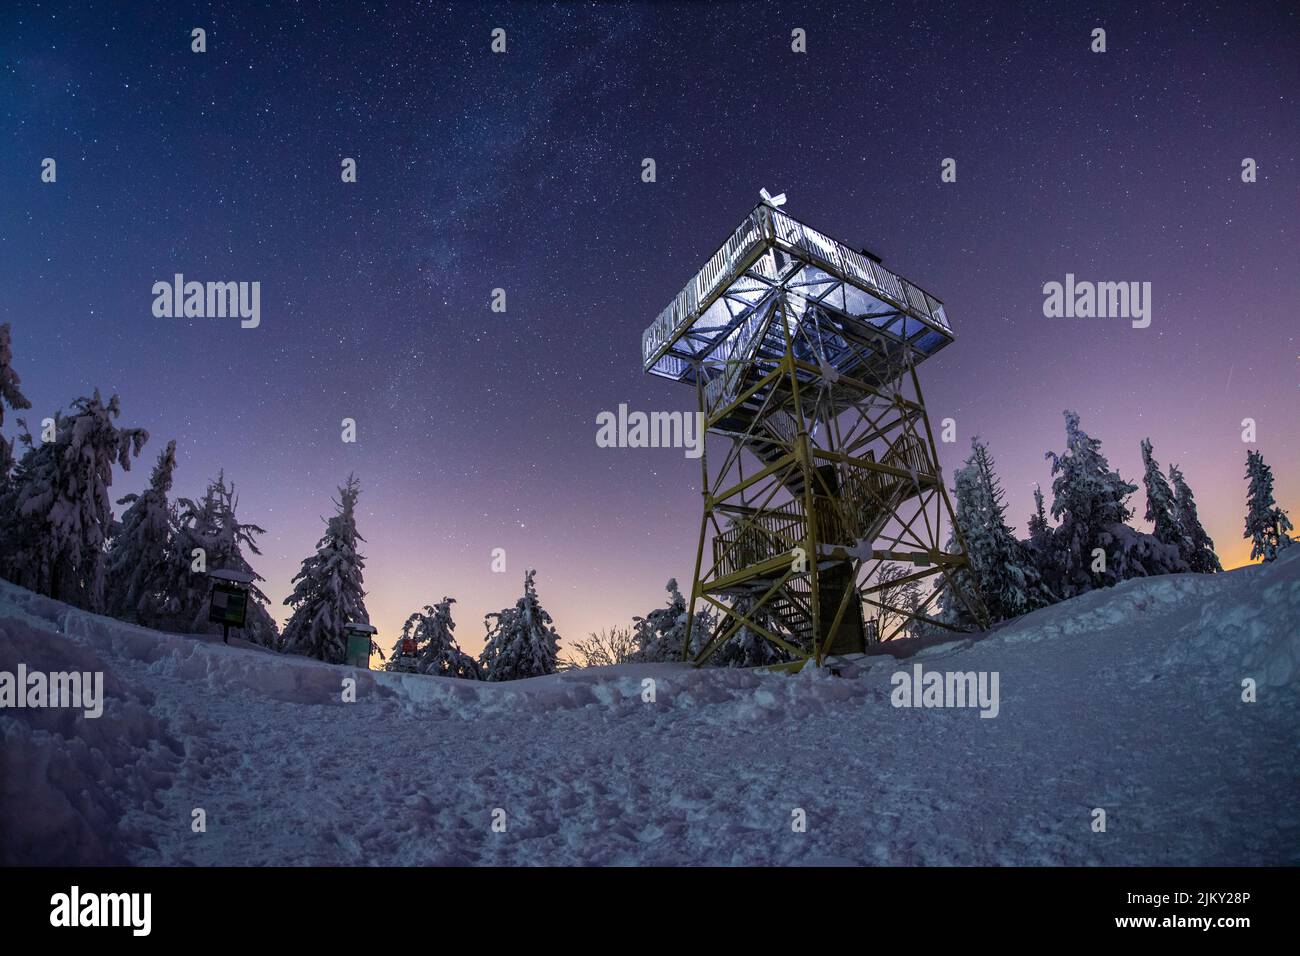 A viewing tower at night with a starry sky background Stock Photo